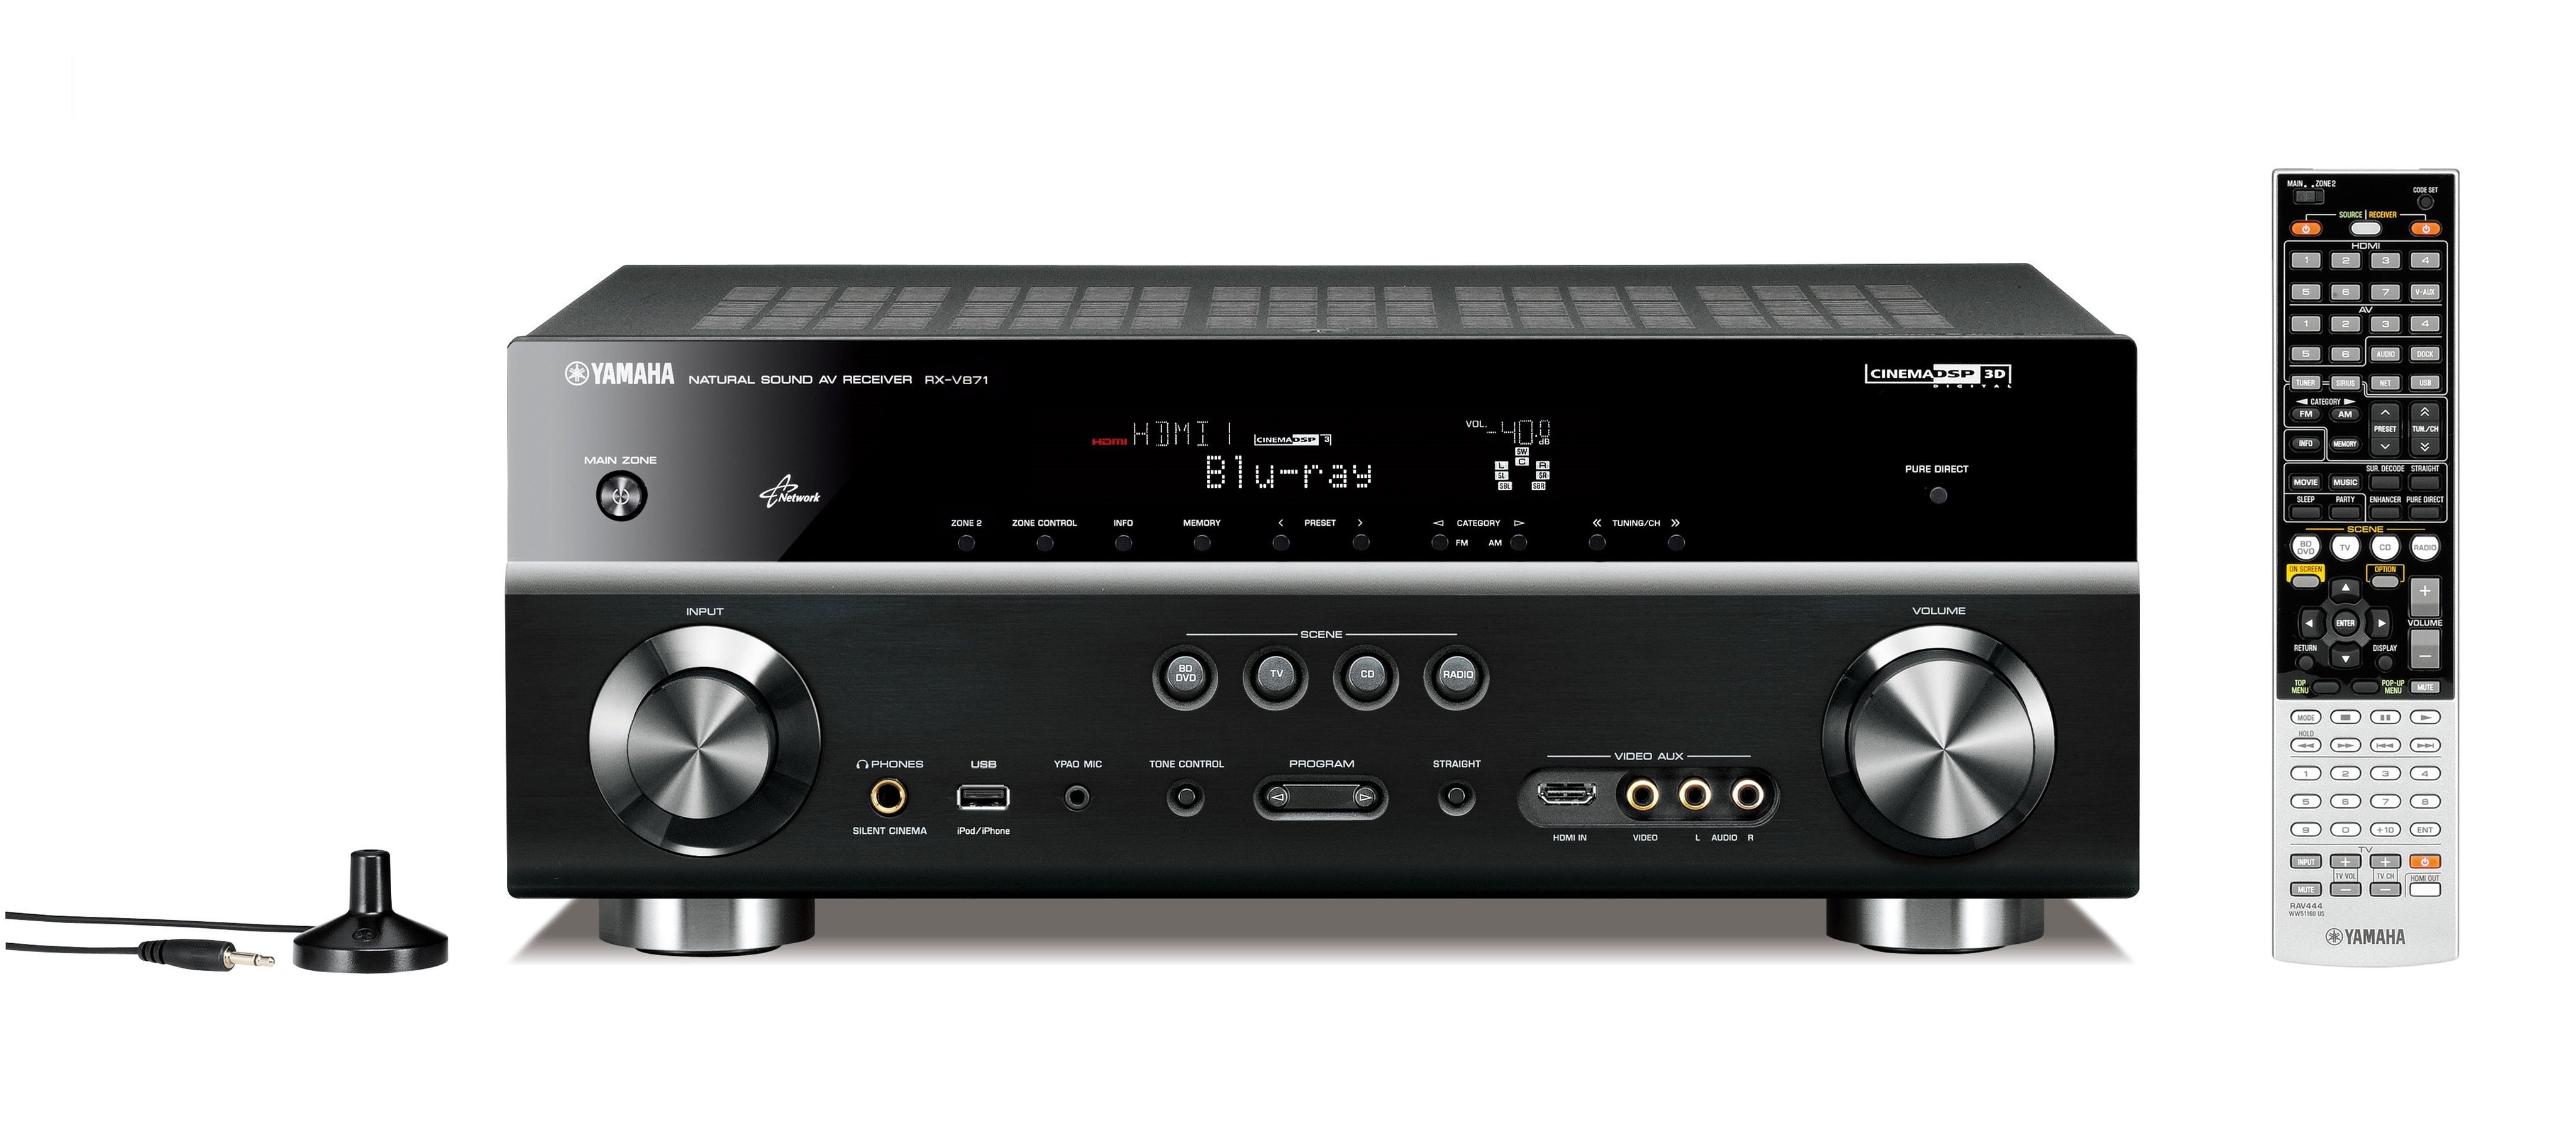 RX-V871 - Overview - AV Receivers - Audio & Visual - Products 